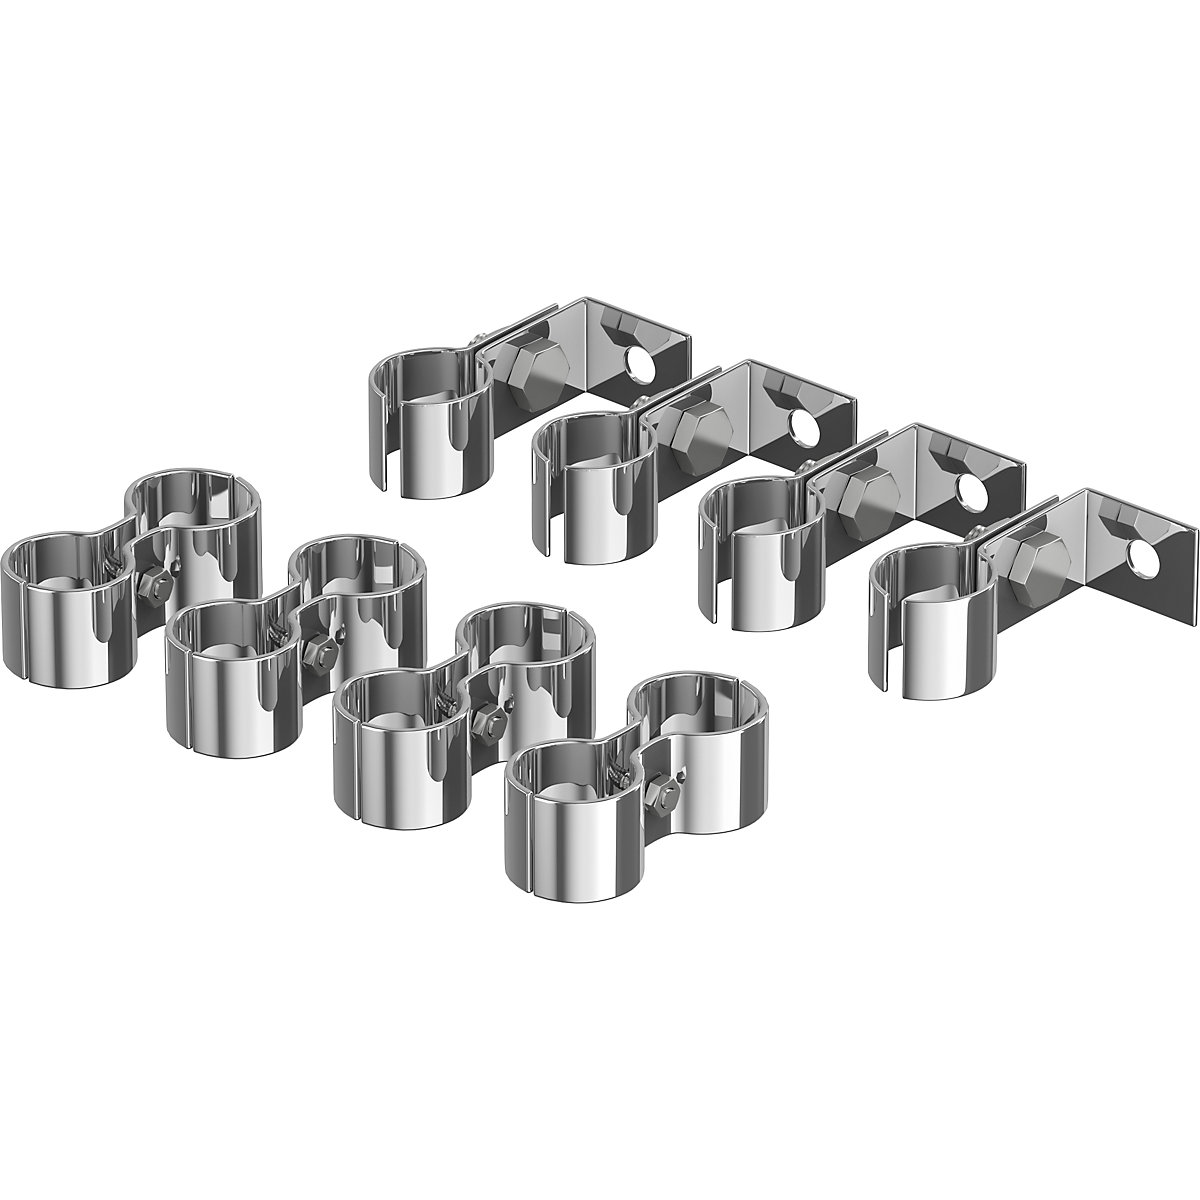 Set of connection clamps and wall brackets